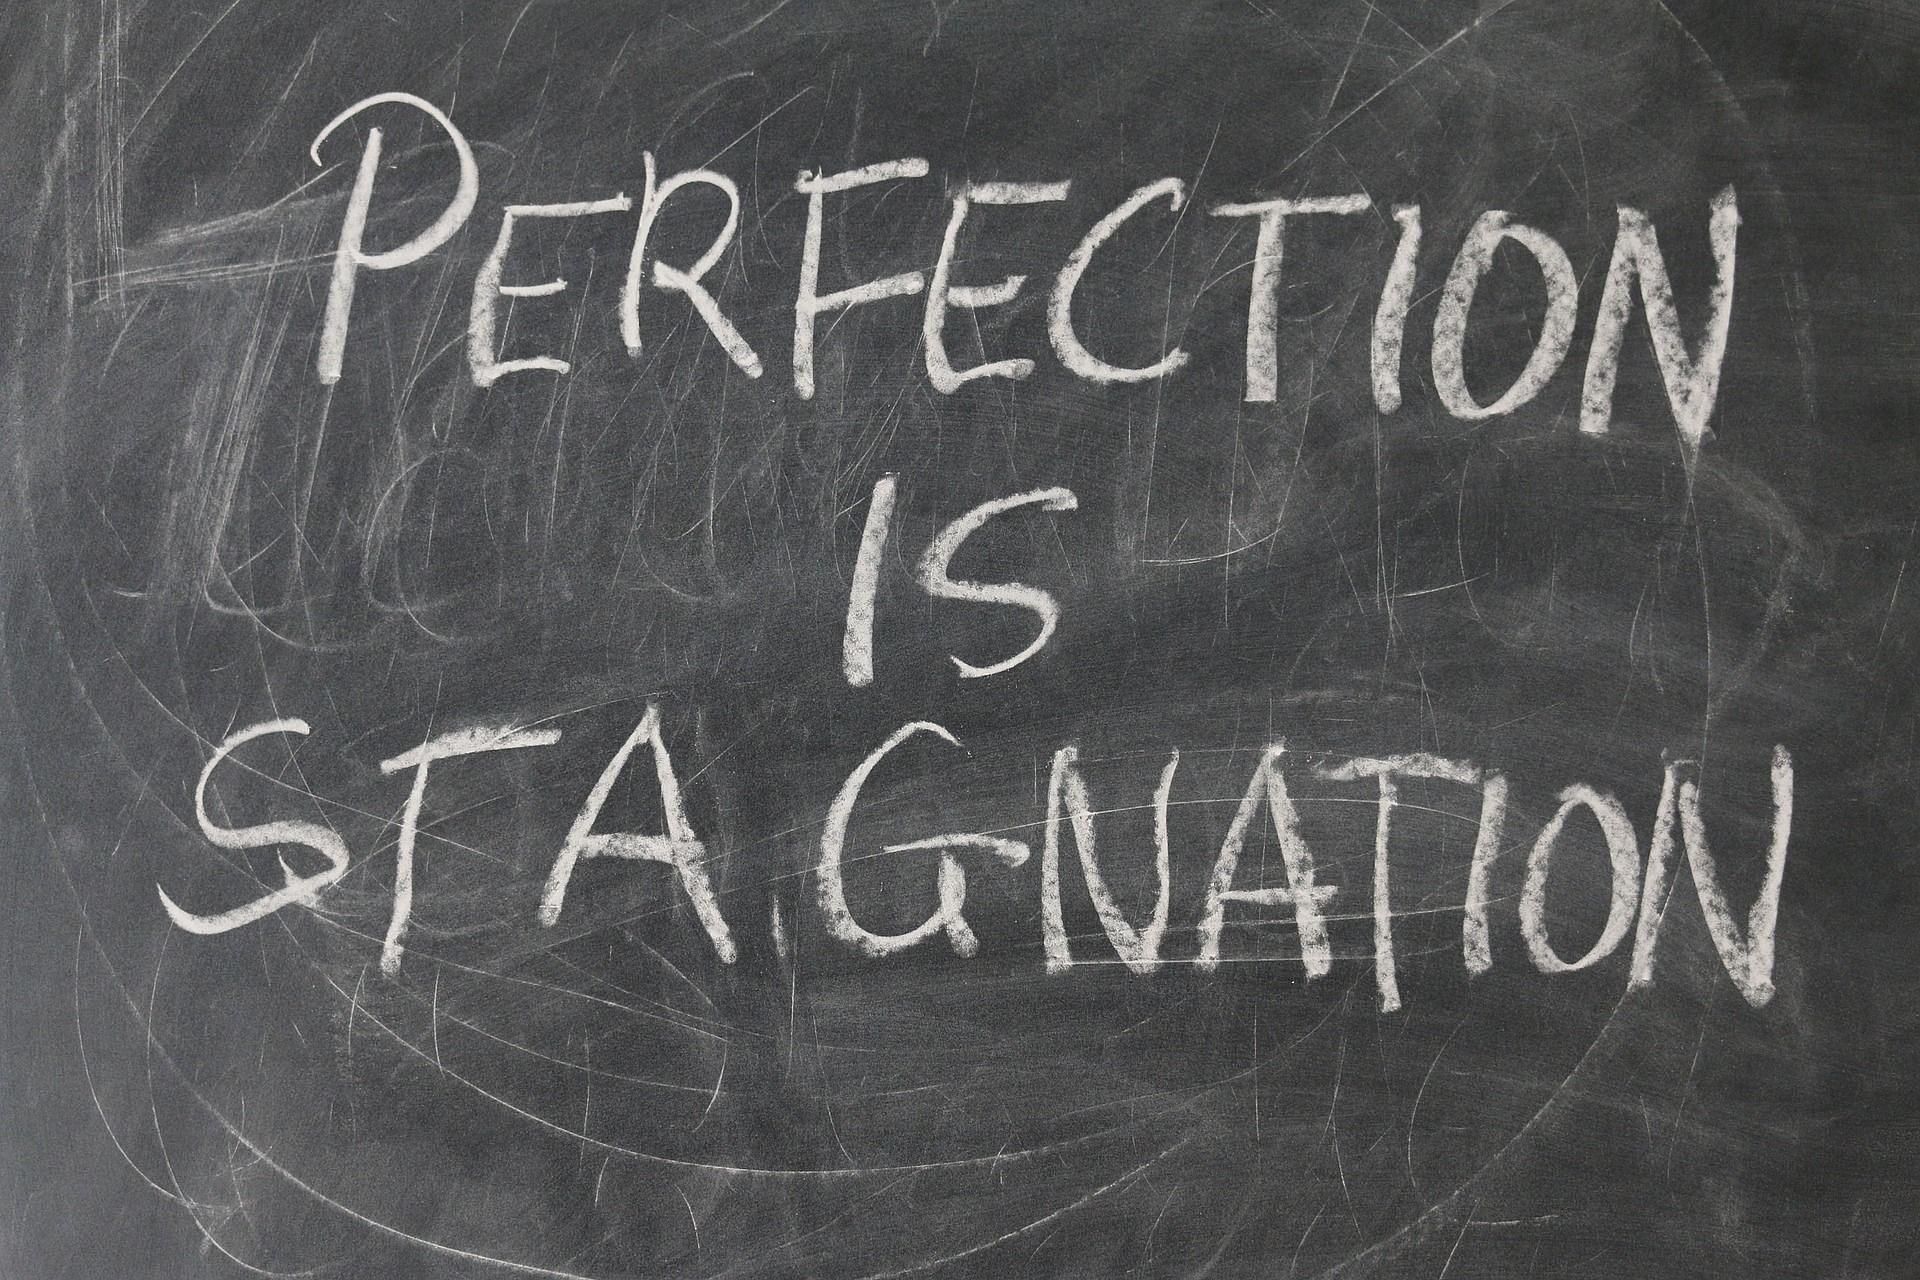 Progress is more important than perfectionism. What will you choose? (Photo via Pixabay/ Gerd Altmann)